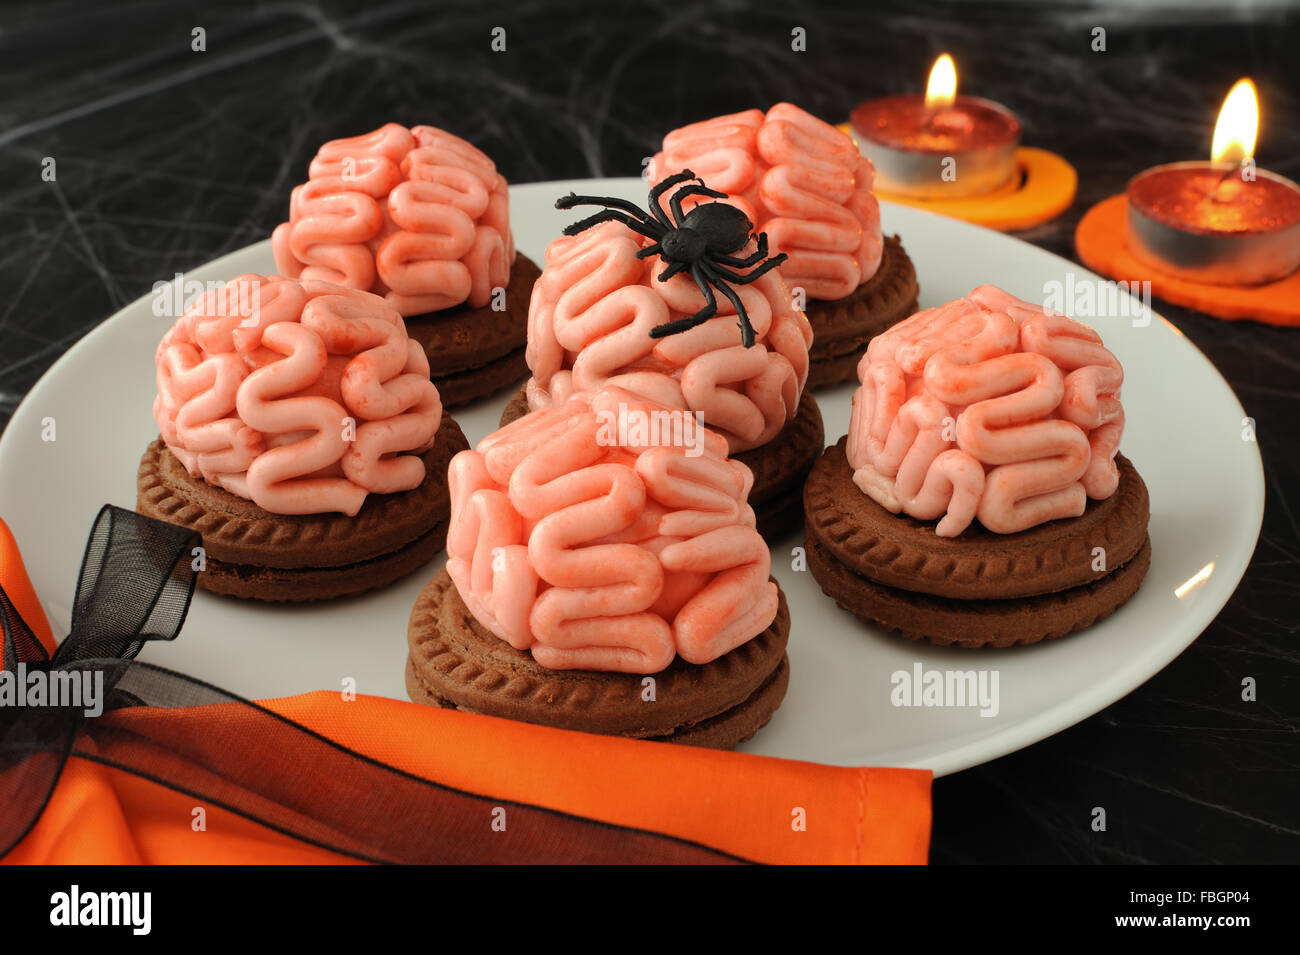 Funny cookie with brains of marzipan on Halloween Stock Photo